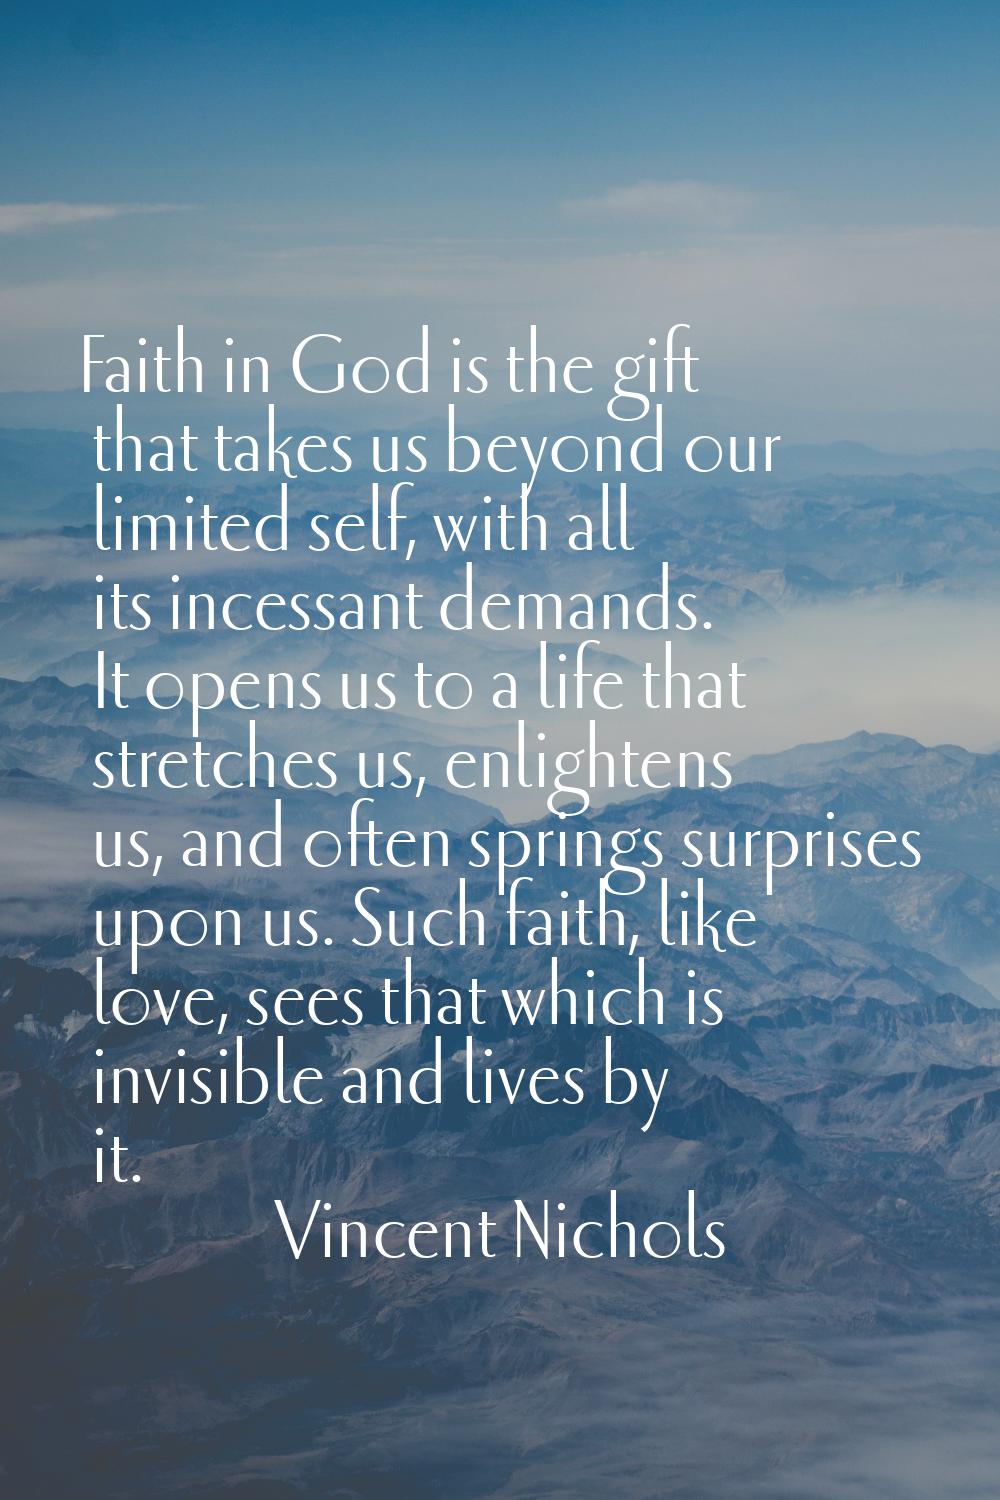 Faith in God is the gift that takes us beyond our limited self, with all its incessant demands. It 